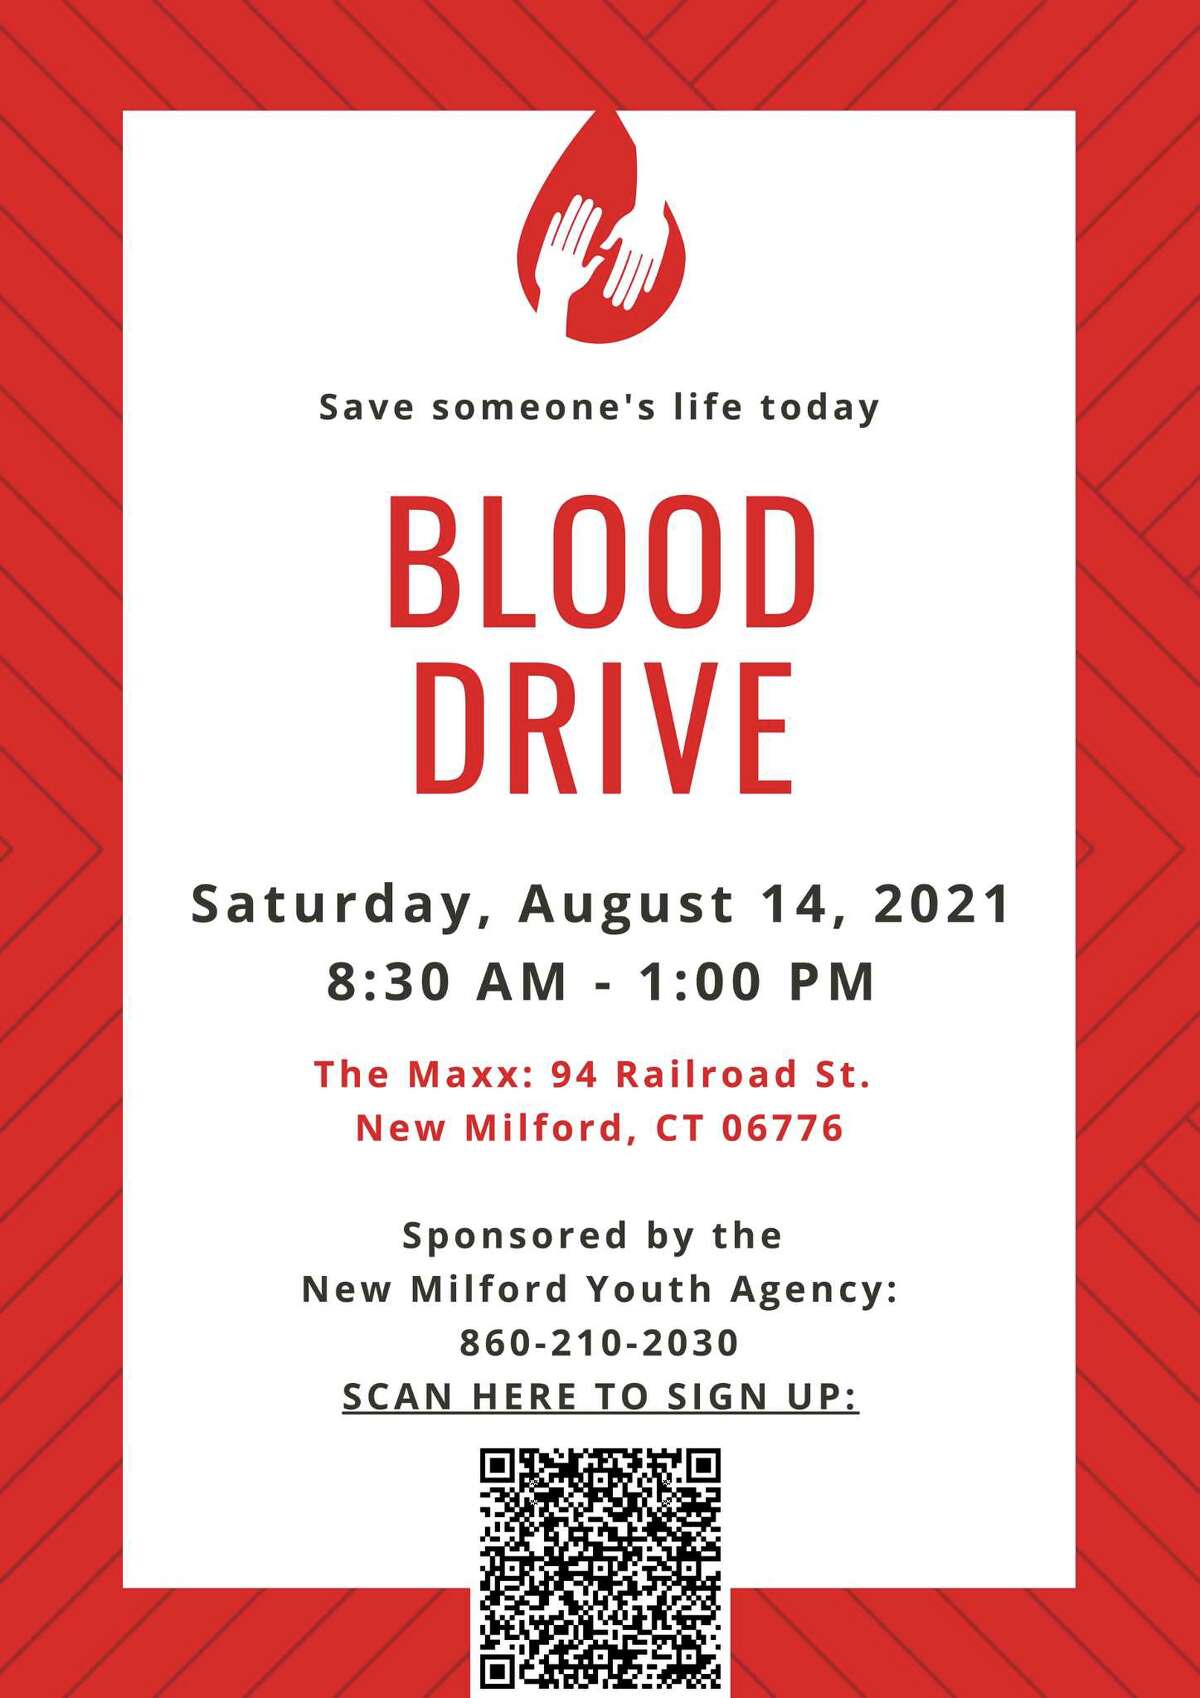 The New Milford Youth Agency is sponsoring a Blood Drive on Saturday, August 14, from 8:30 a.m. until 1 p.m., at The Maxx performance venue. Scan the bar code box on the flyer to sign up for the blood drive.